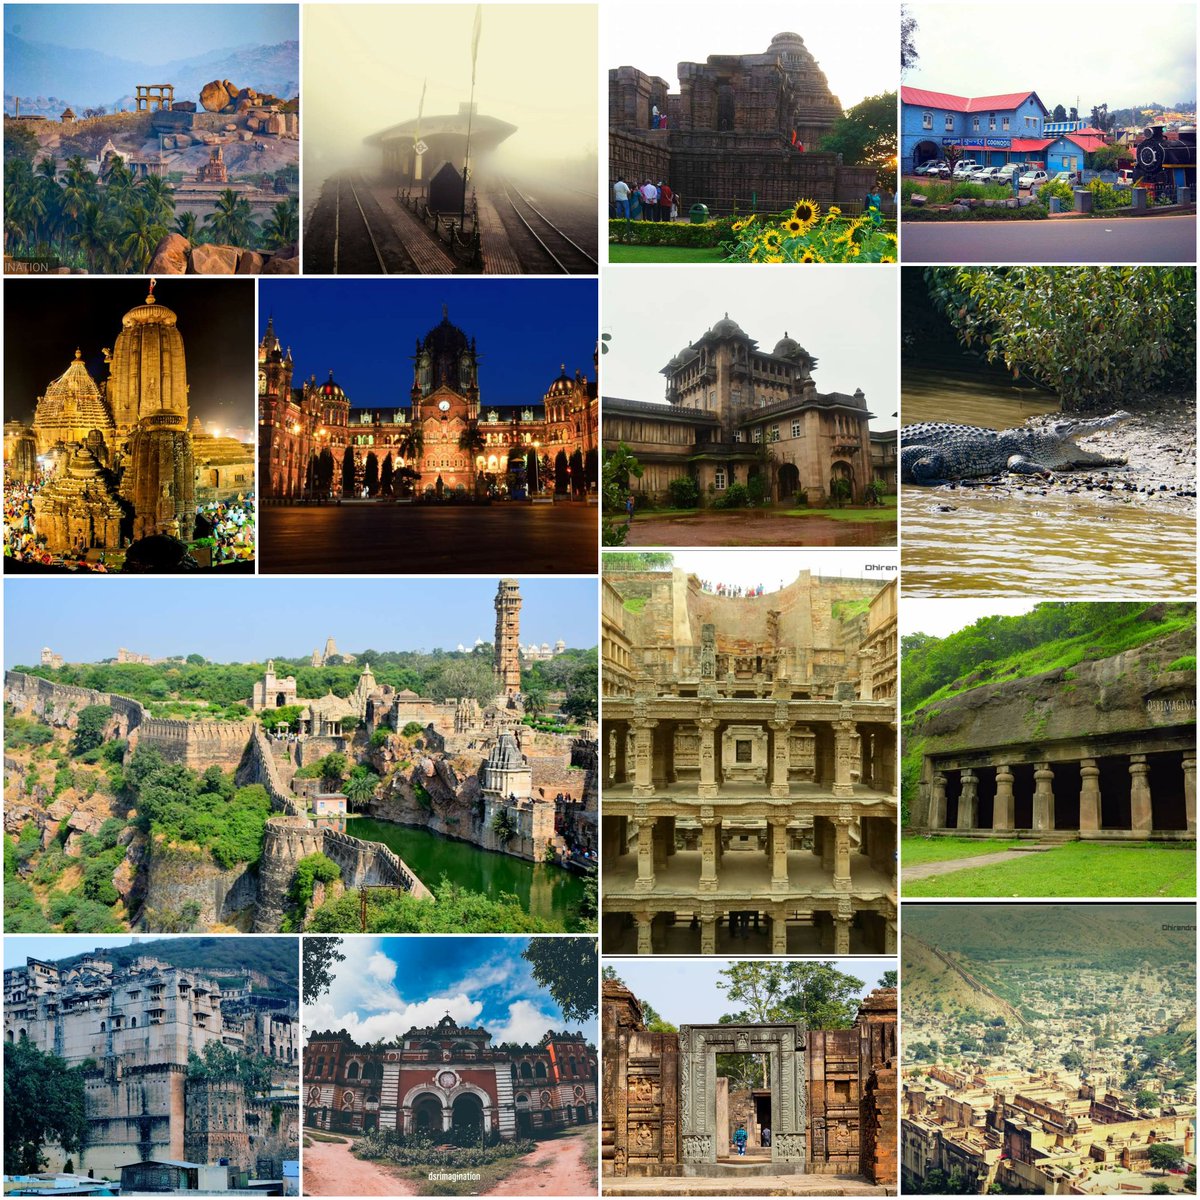 Happy World Heritage Day.
.
The theme for World Heritage Day for the year 2020 is ‘Shared Culture’, ‘Shared heritage’ and ‘Shared responsibility’.
Some Snaps of the Heritages witnessed during my Travel Diaries.
#heritage @BBSRBuzz
@odisha_tourism @my_rajasthan @incredibleindia